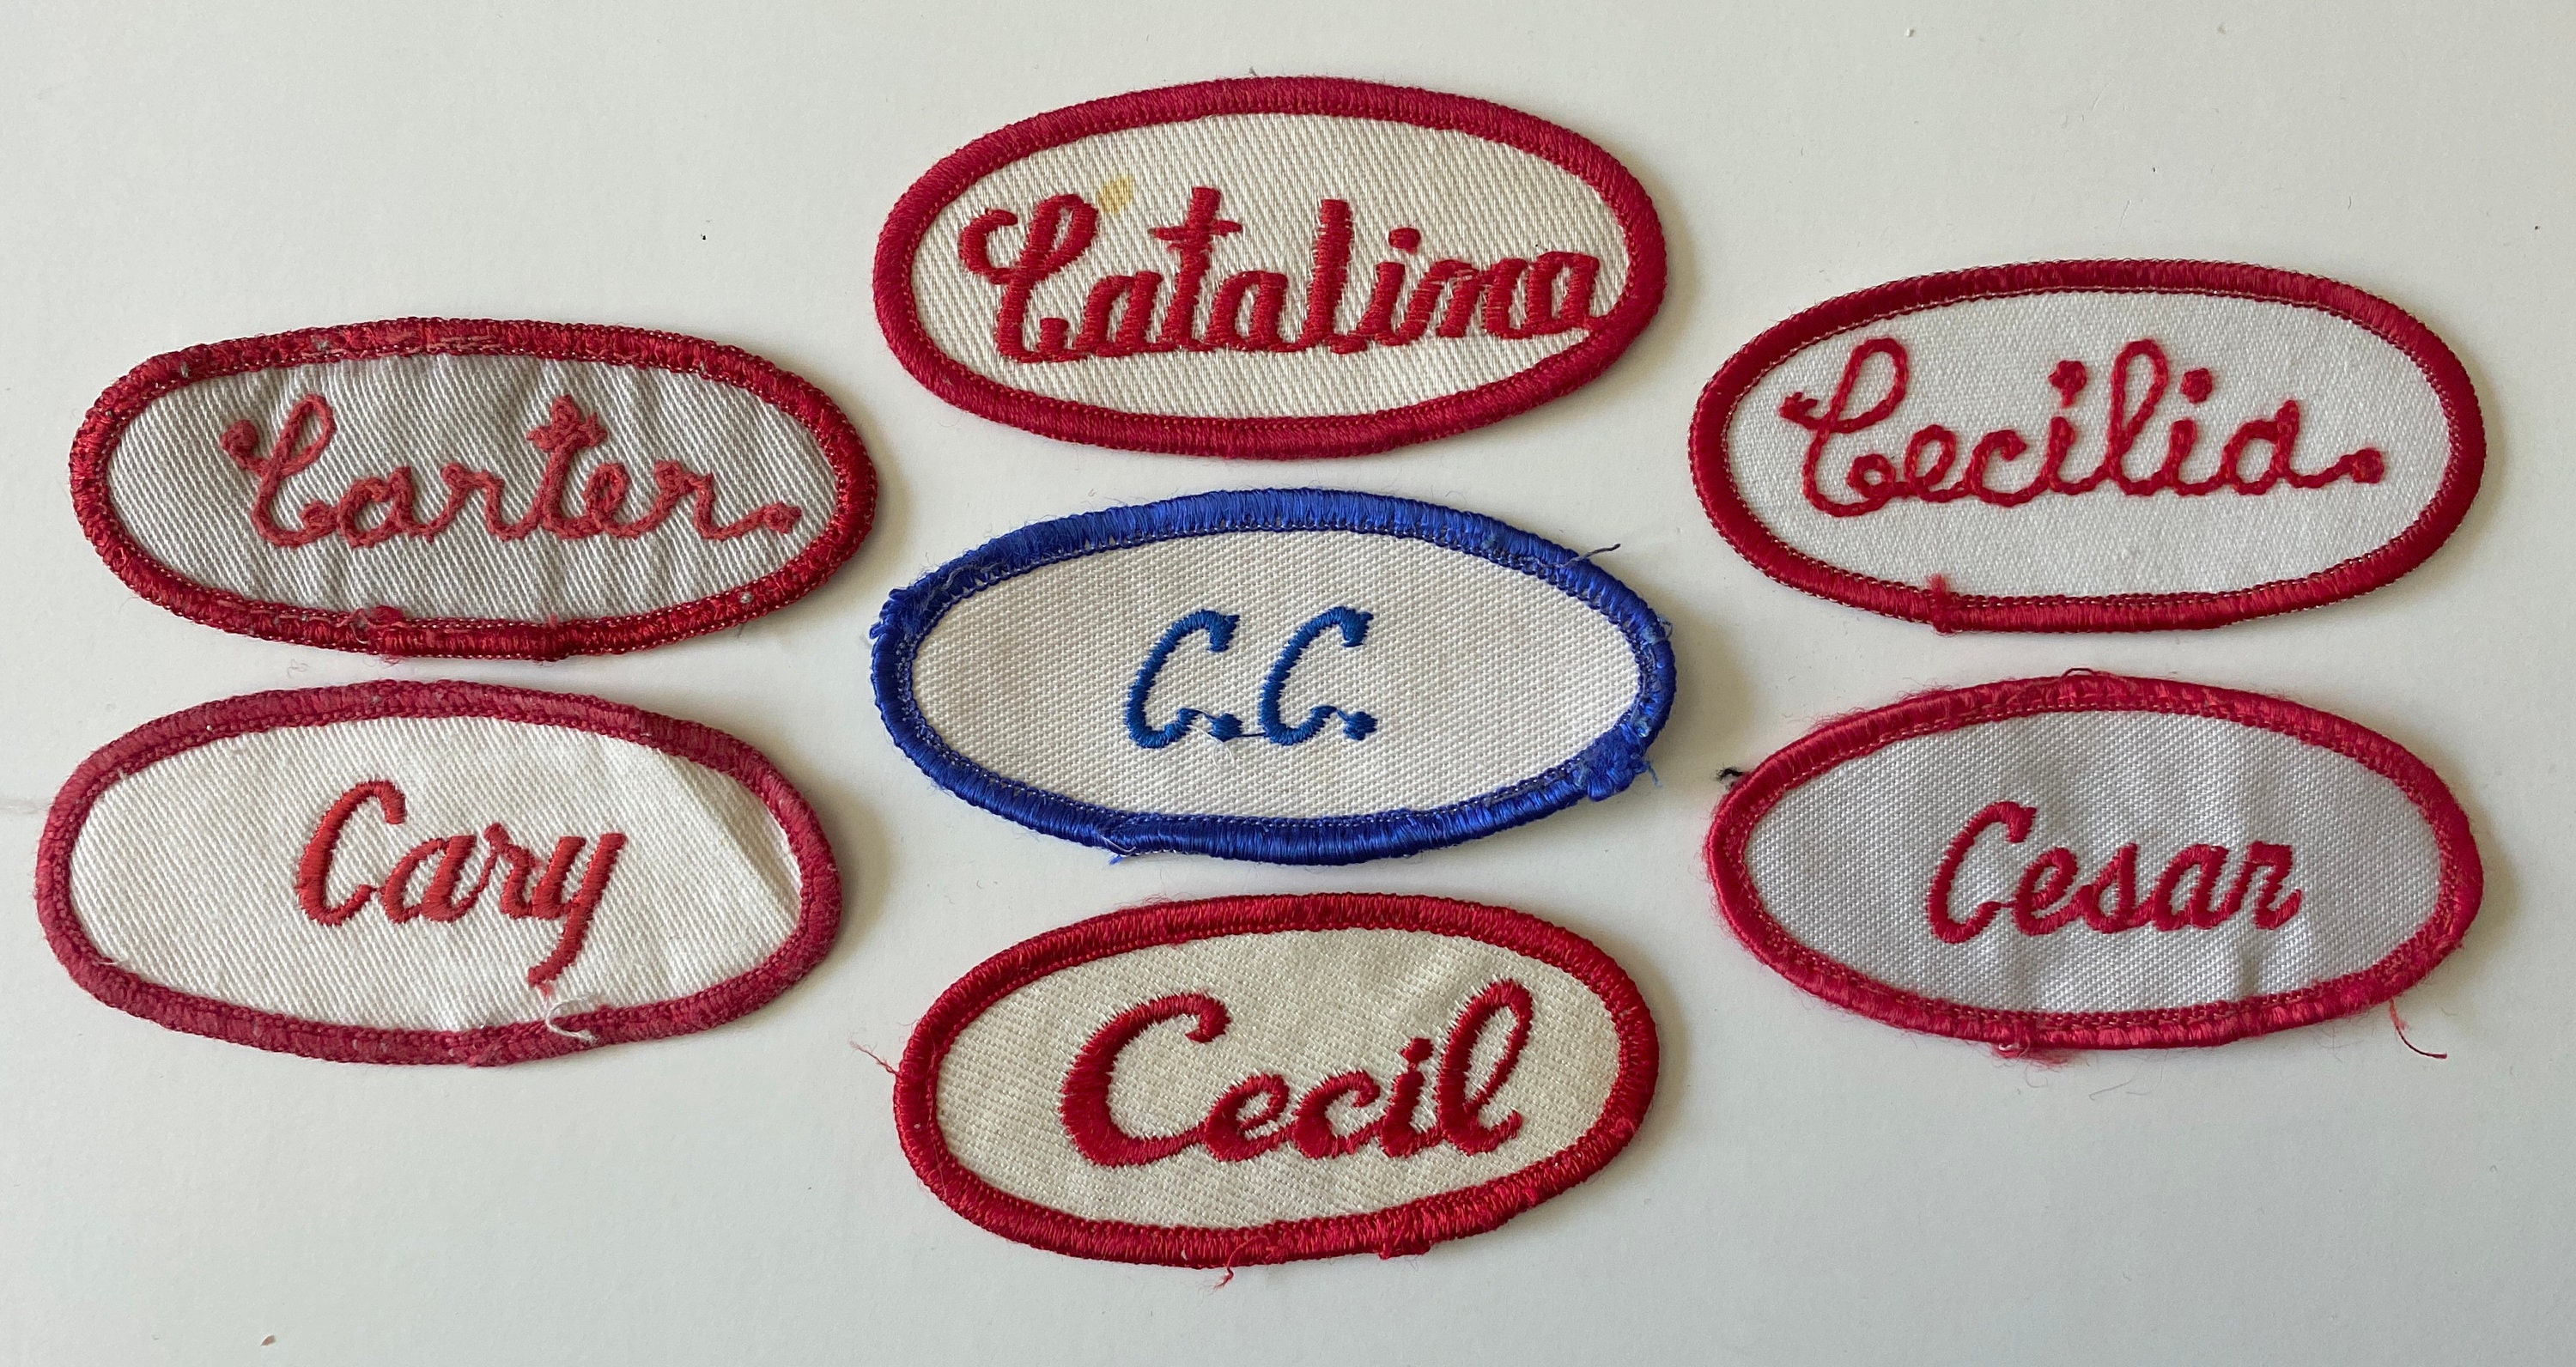 NEW NAMES Vintage Embroidered Oval Uniform Name Patches Fun Names